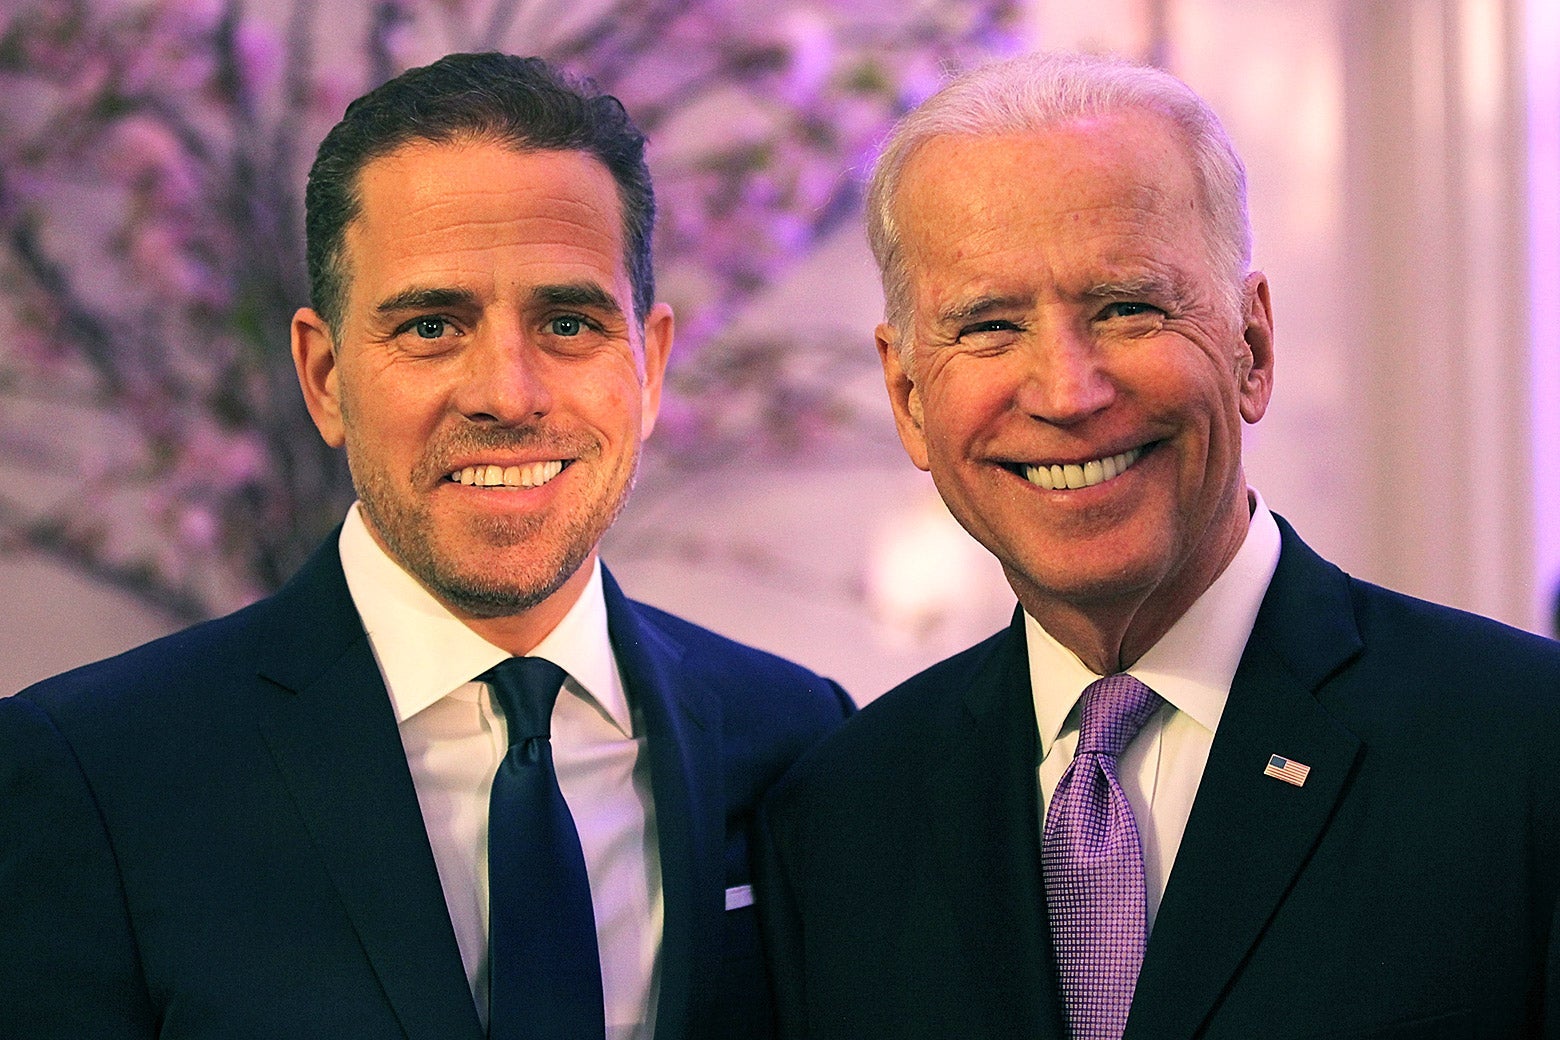 Hunter and Joe Biden smile toward the camera, standing in a room with light purple lighting and a tree in bloom in the background